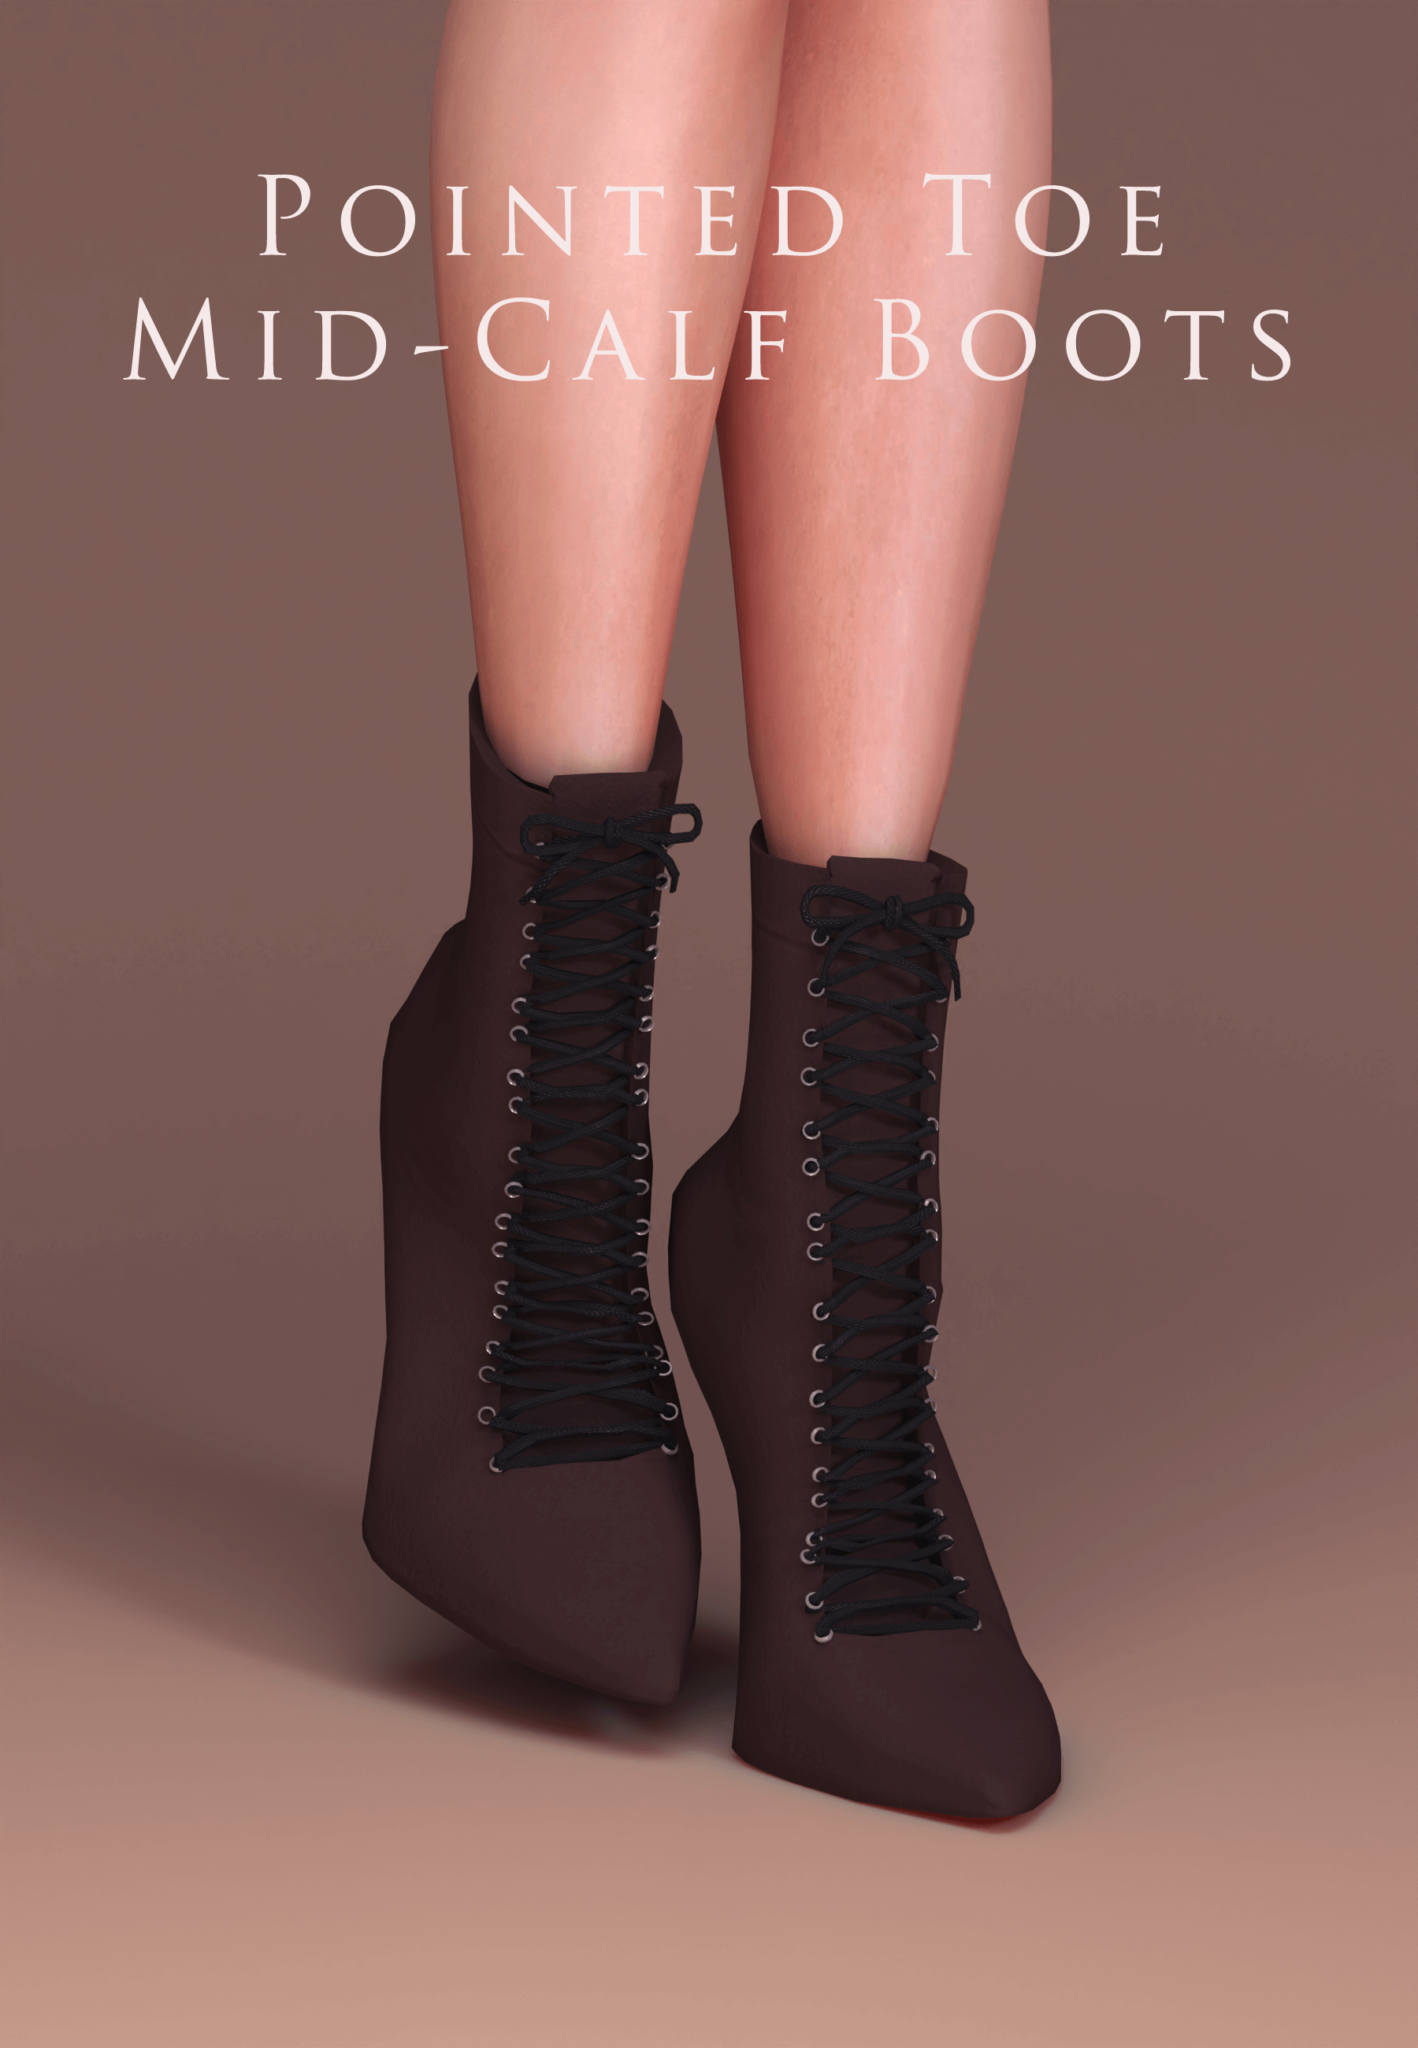 Sims 4 Pointed Toe Mid Calf Boots Slider & Non Slider Versions - The ...